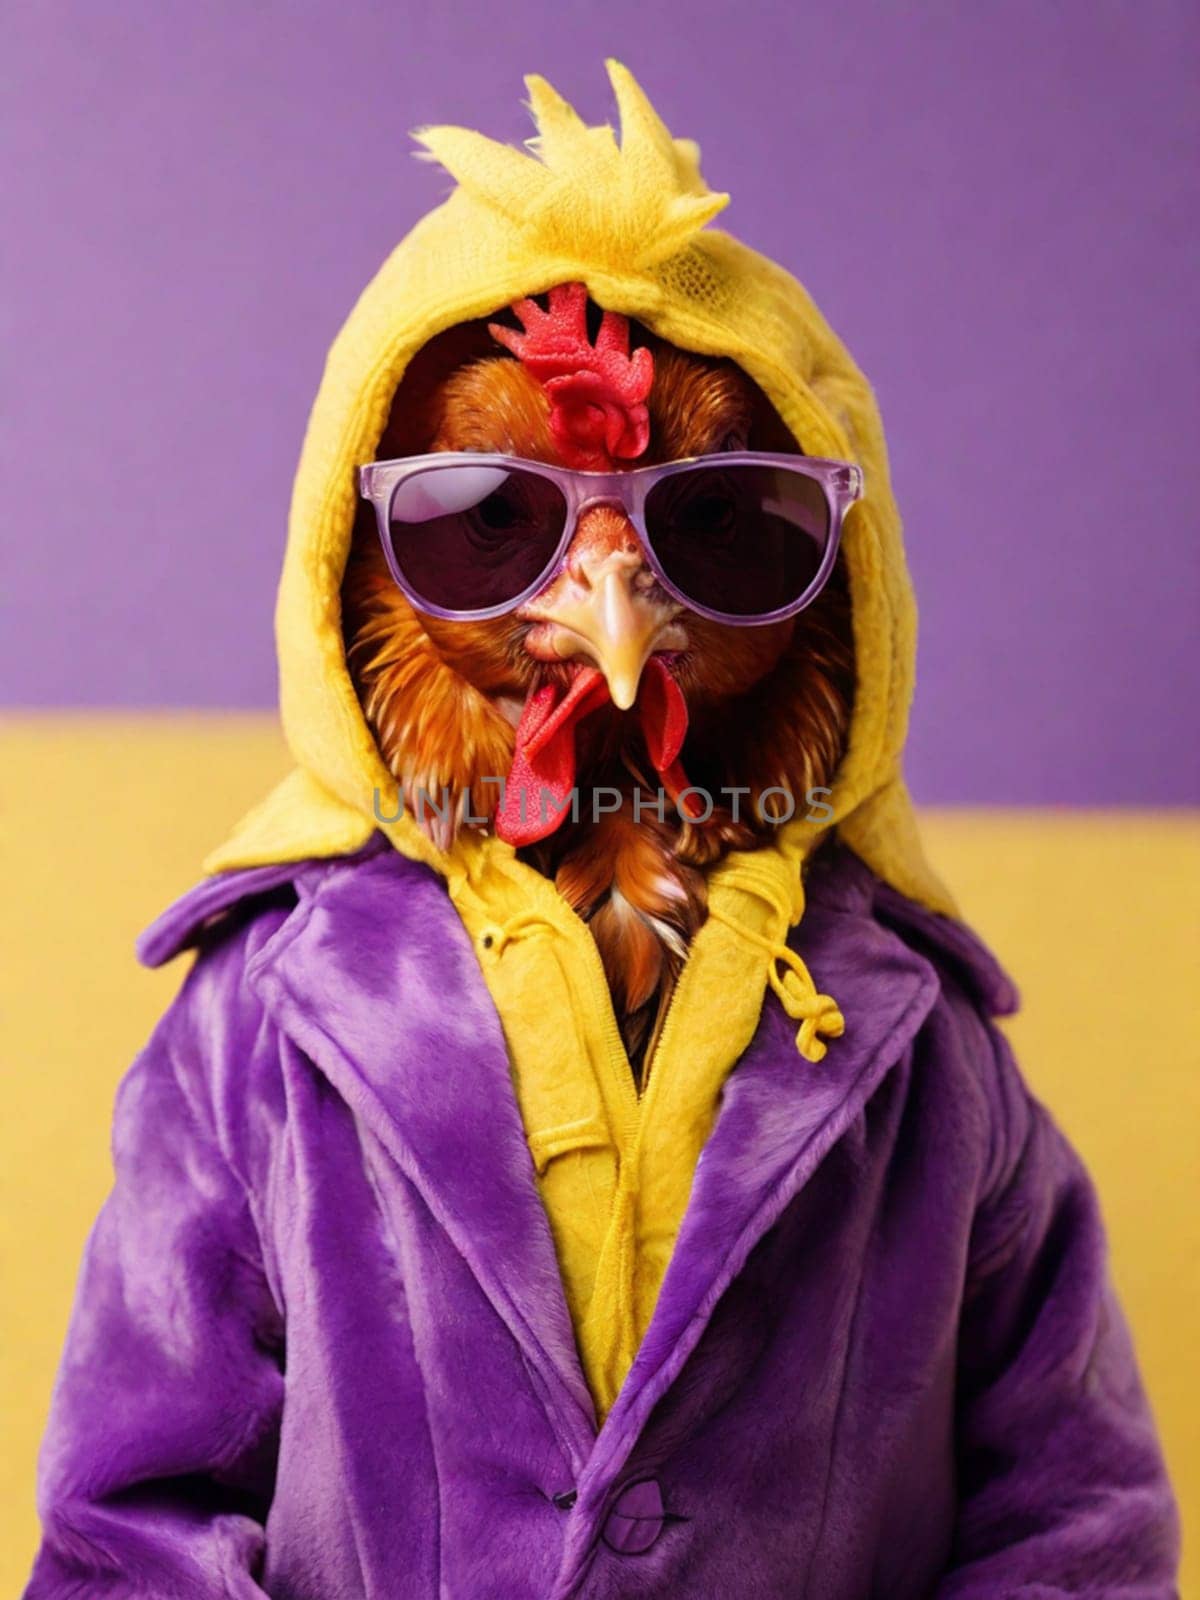 Fashionable rooster, hen in a yellow-violet jacket and sunglasses on a purple background.